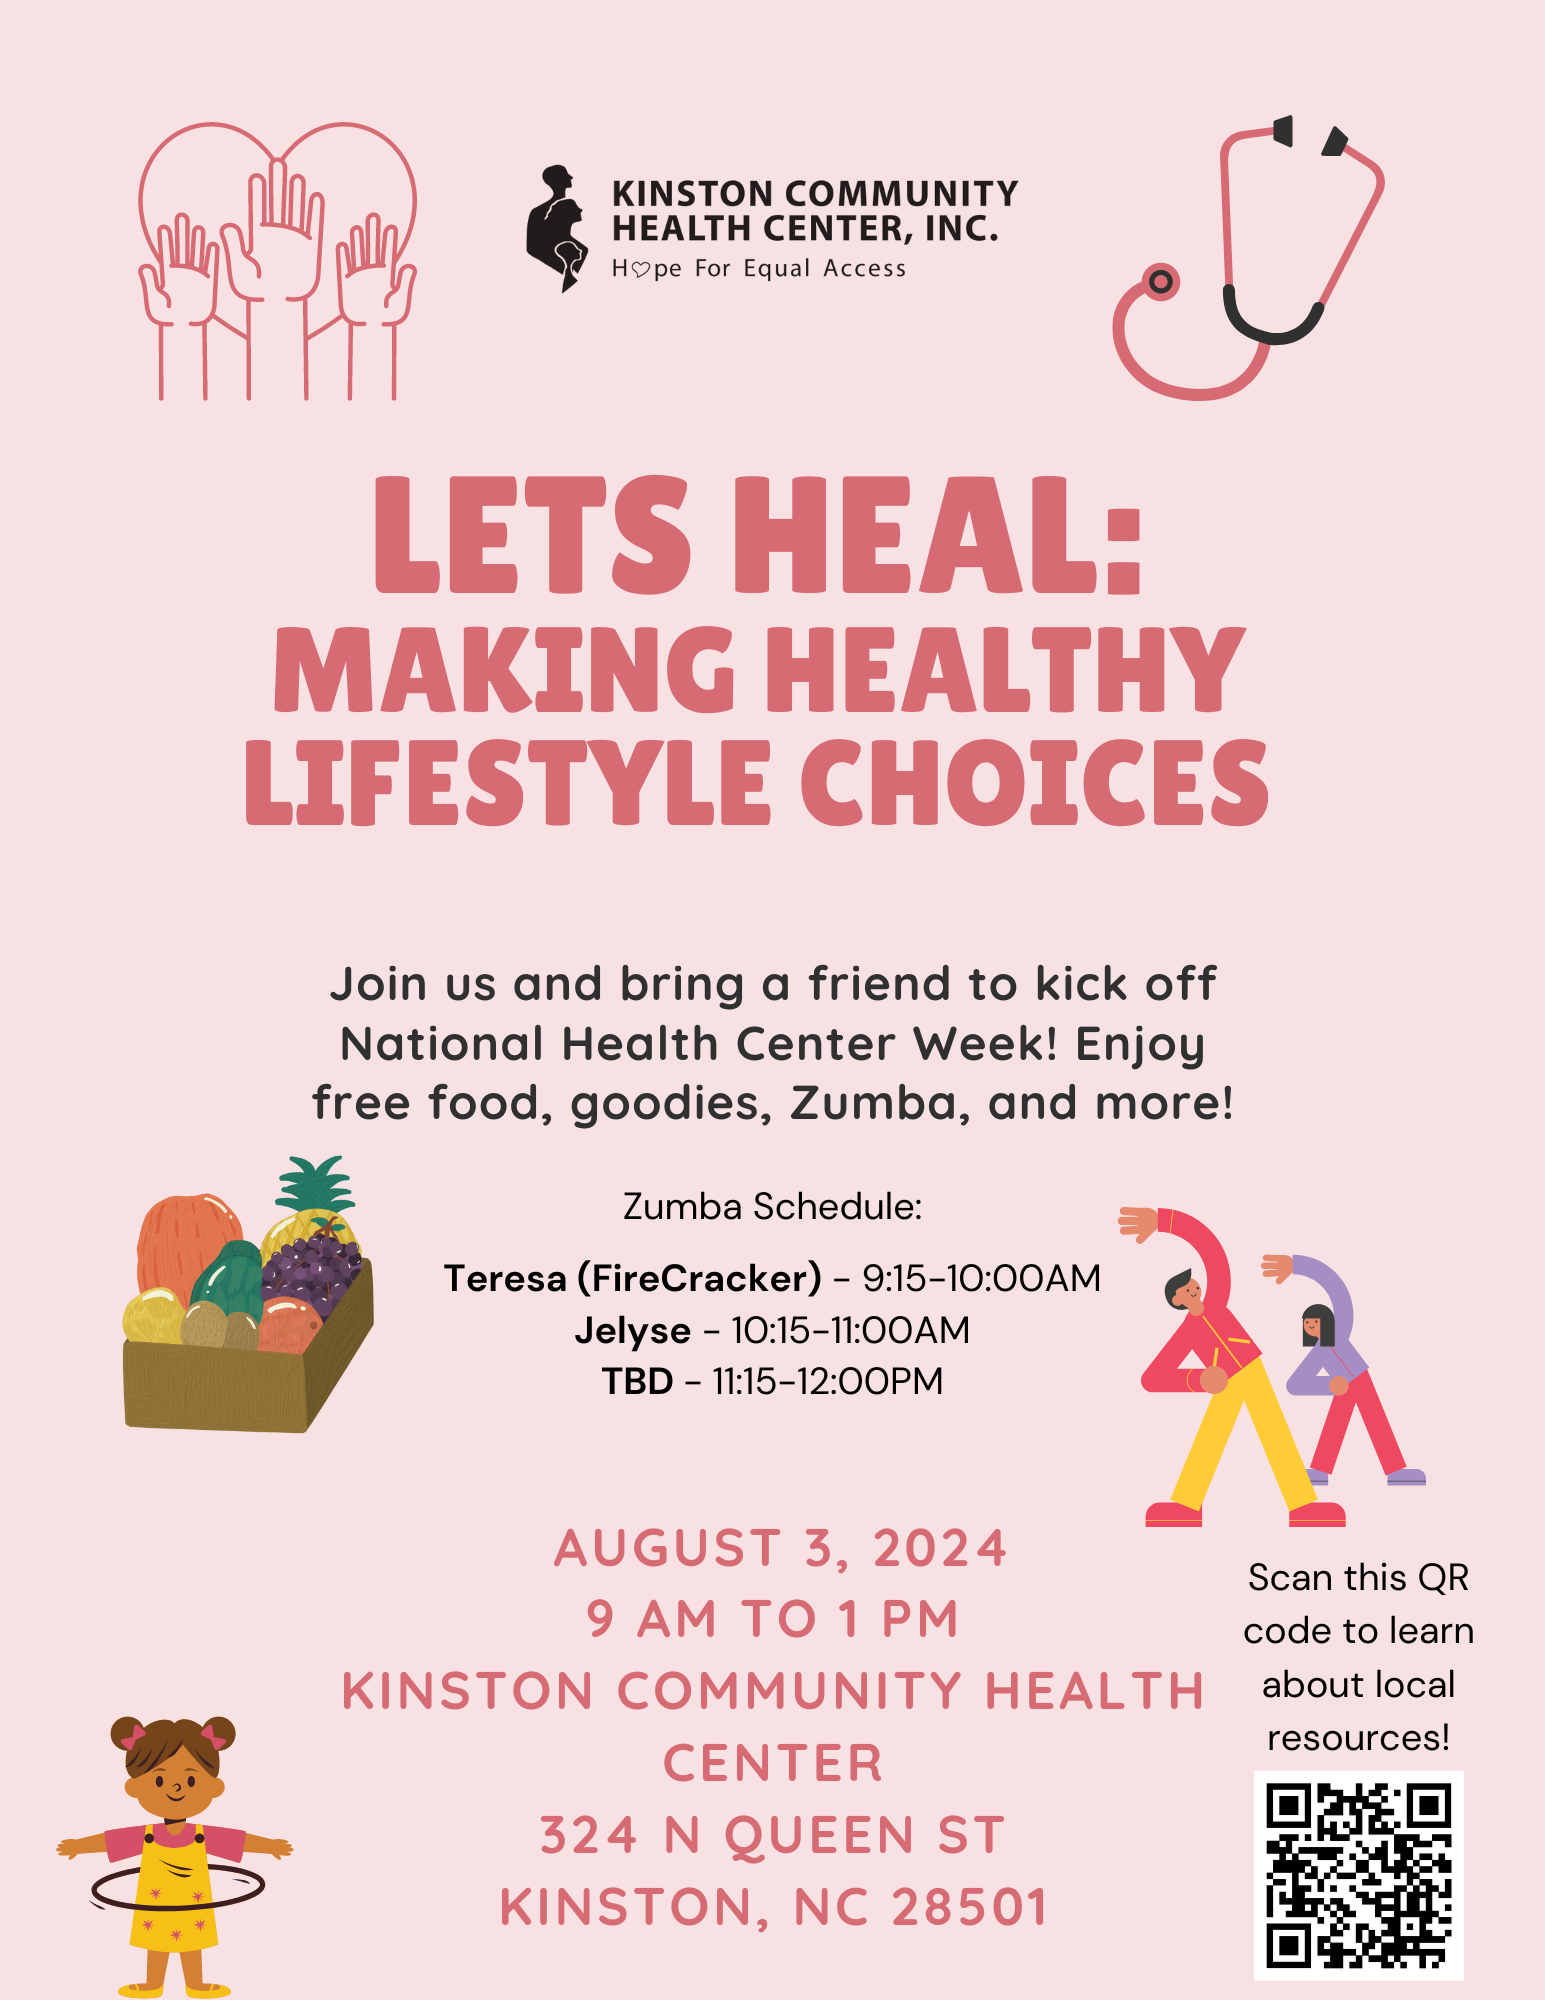 Let’s Heal: Making Healthy Lifestyle Choices